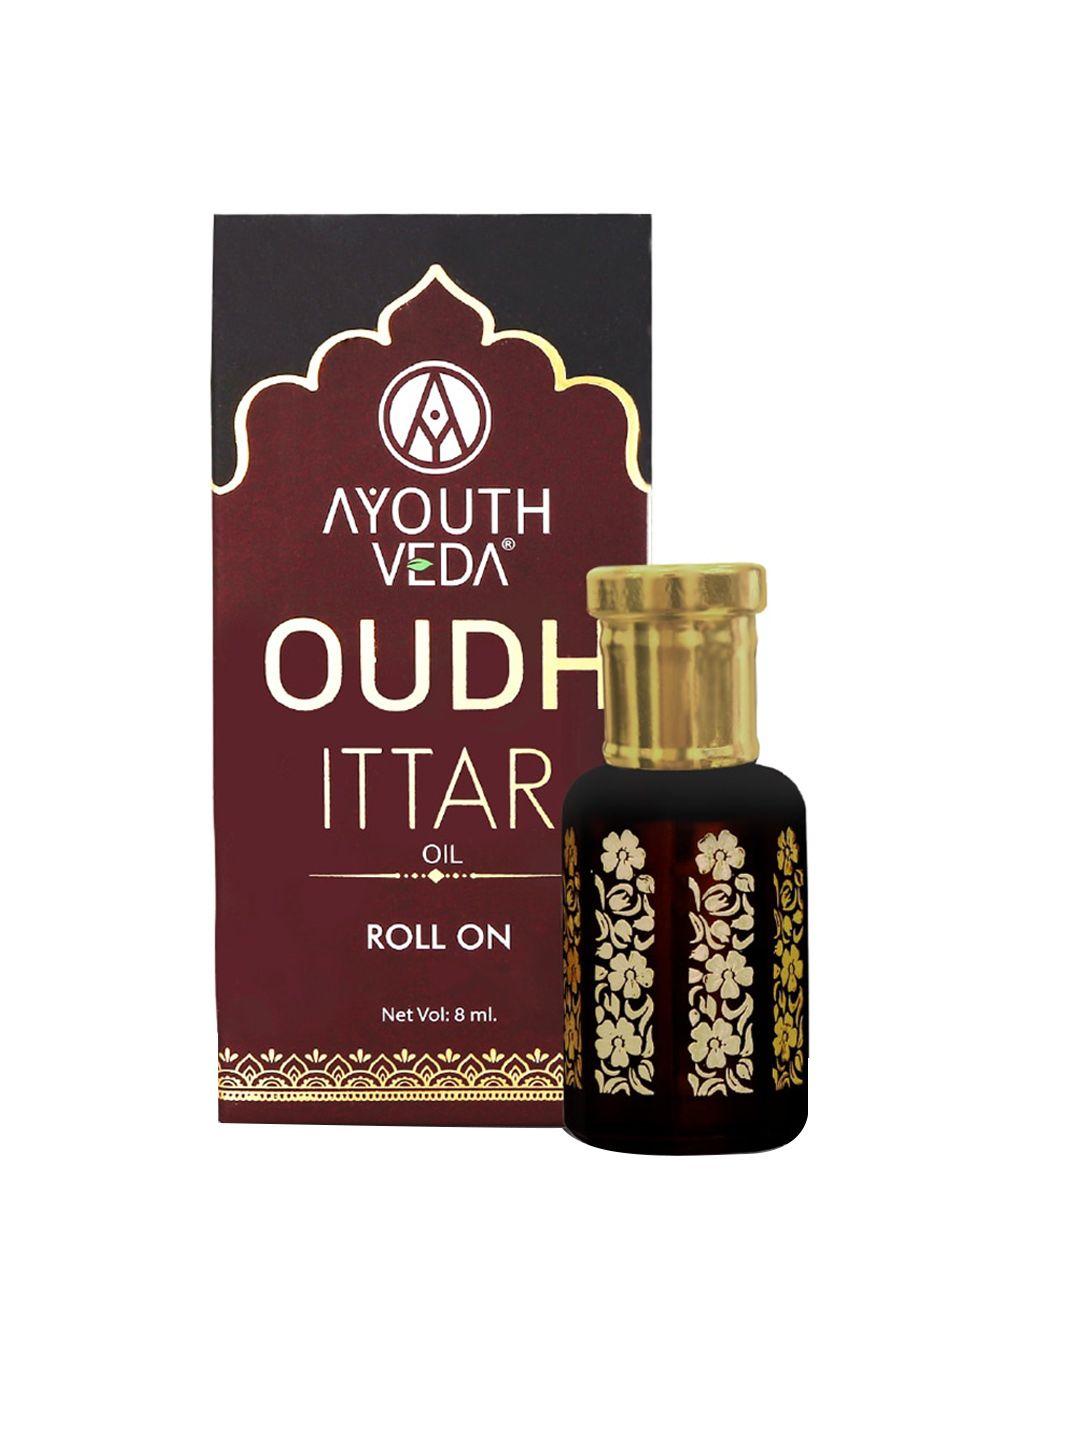 ayouthveda oudh natural alcohol free & long lasting ittar roll on - 8ml